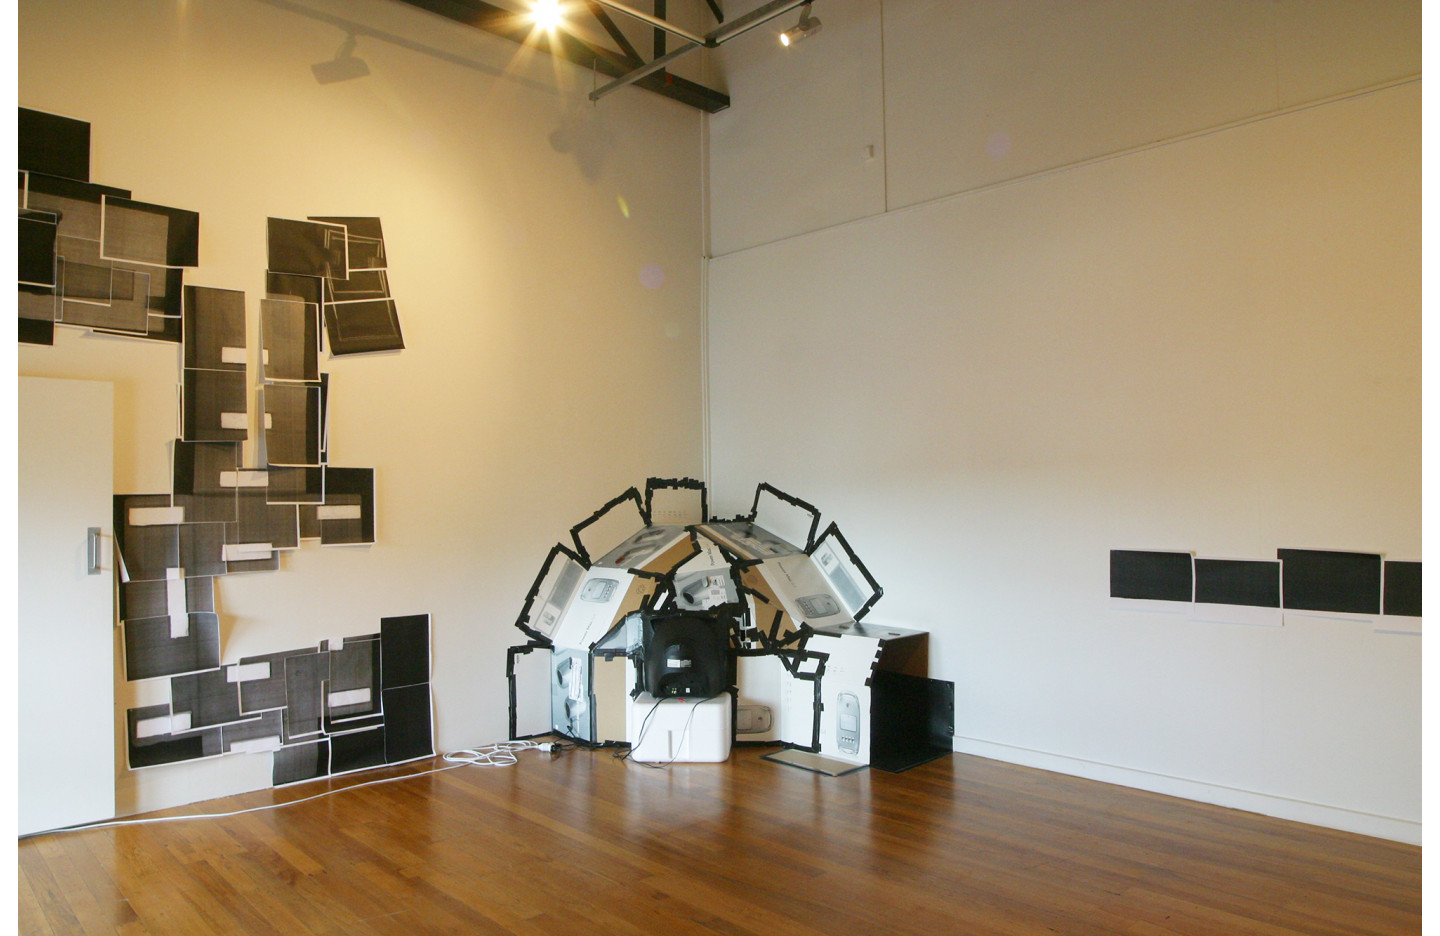 Theme for Great Cities, Ramp Gallery (2003)